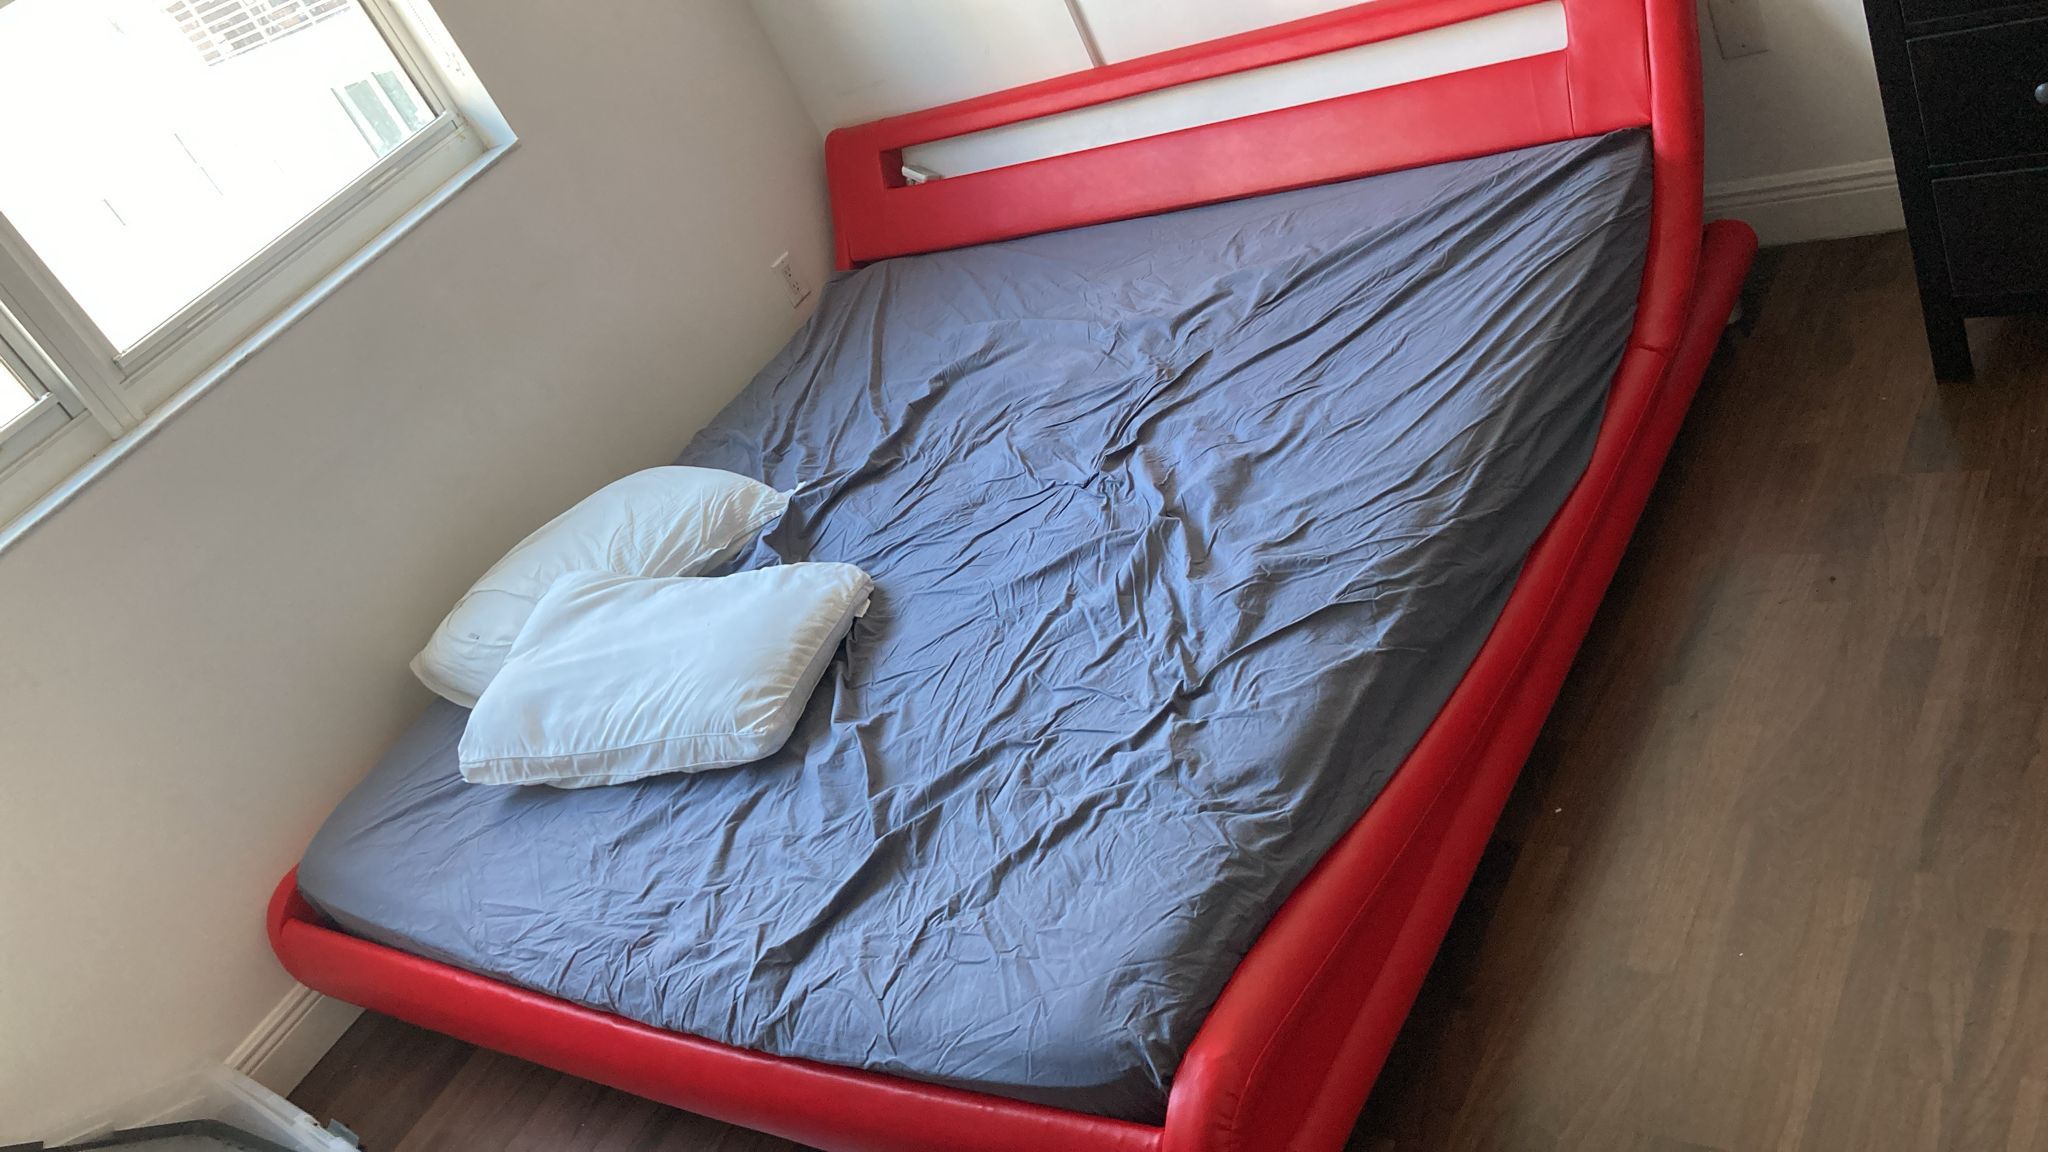 Red Bed Frame For Sale 100 